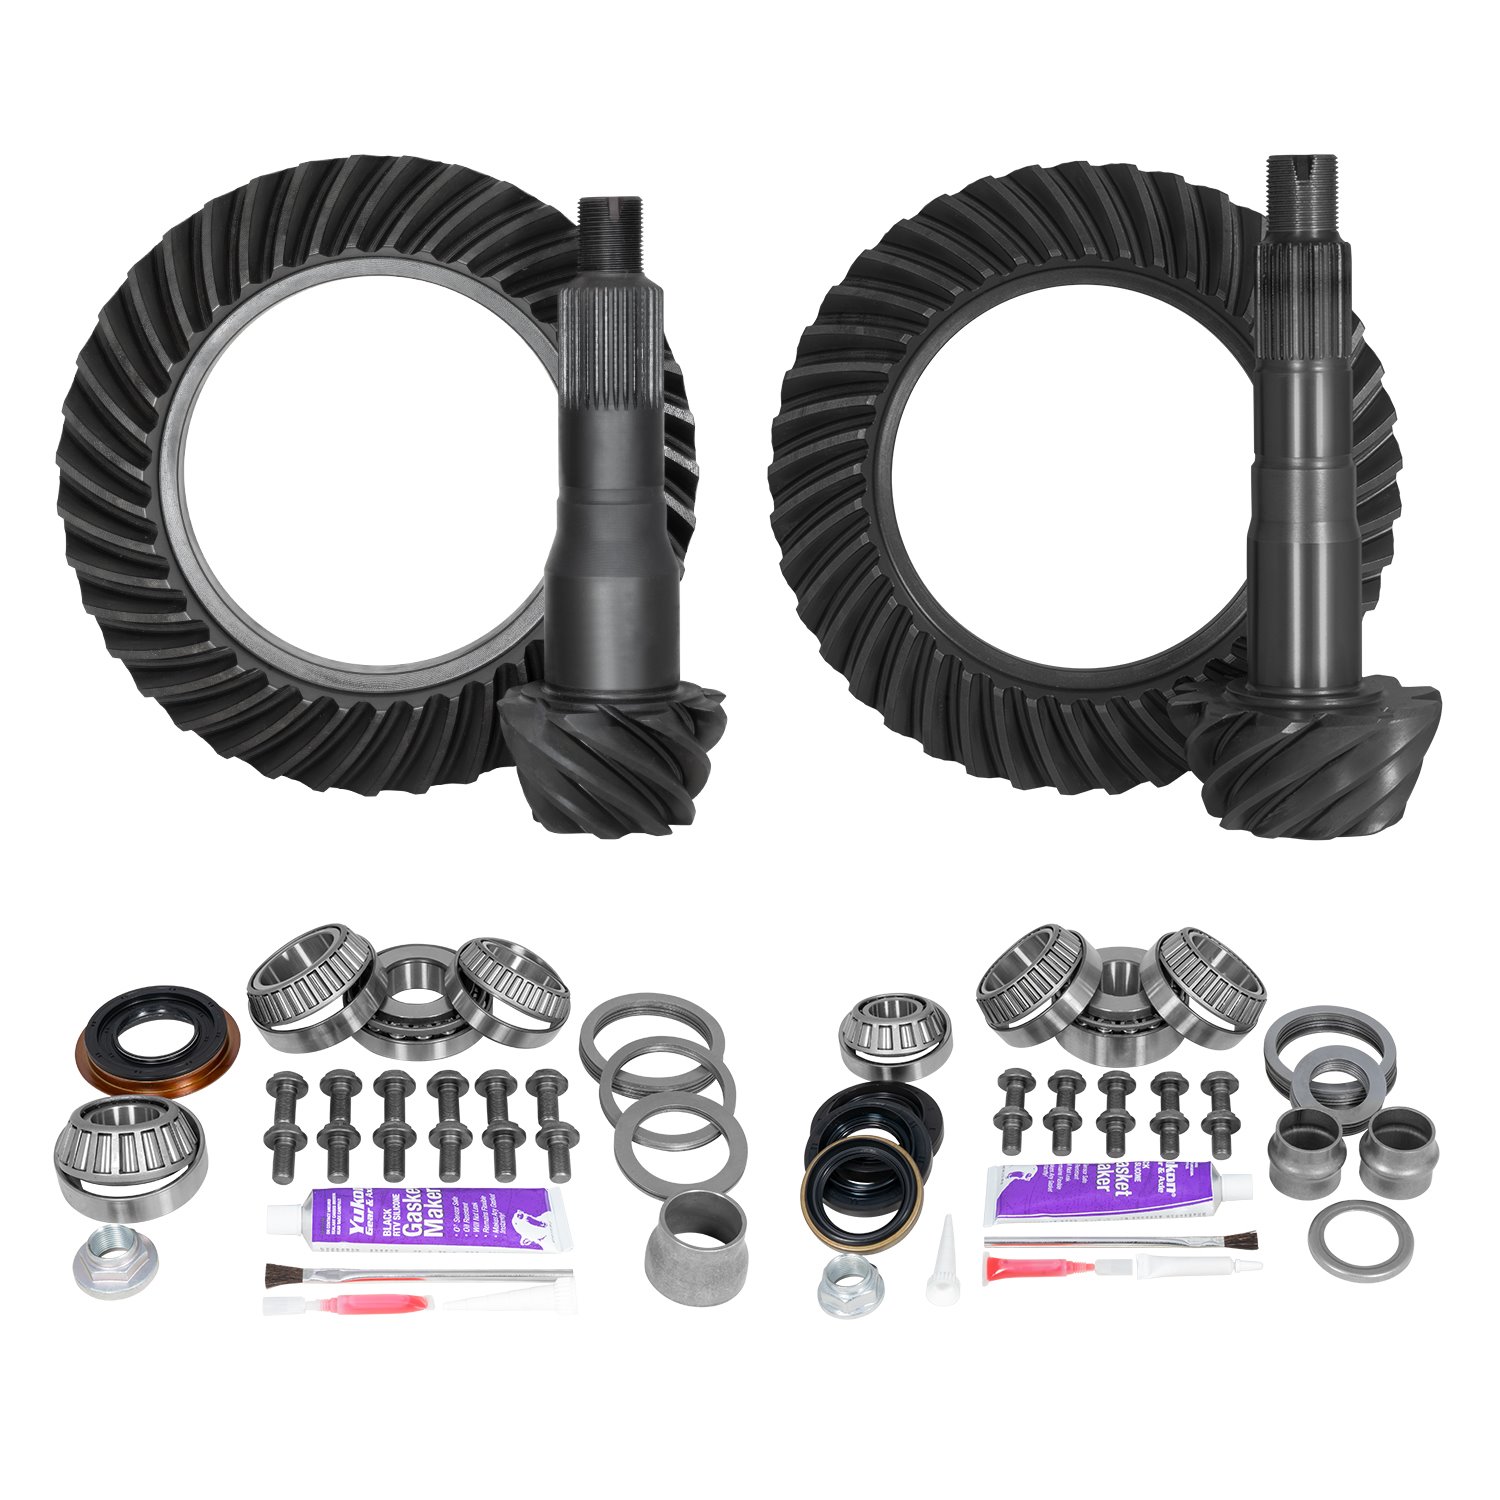 Ring & Pinion Gear Kit Package Front & Rear With Install Kits - Toyota 8.75/8Ifs